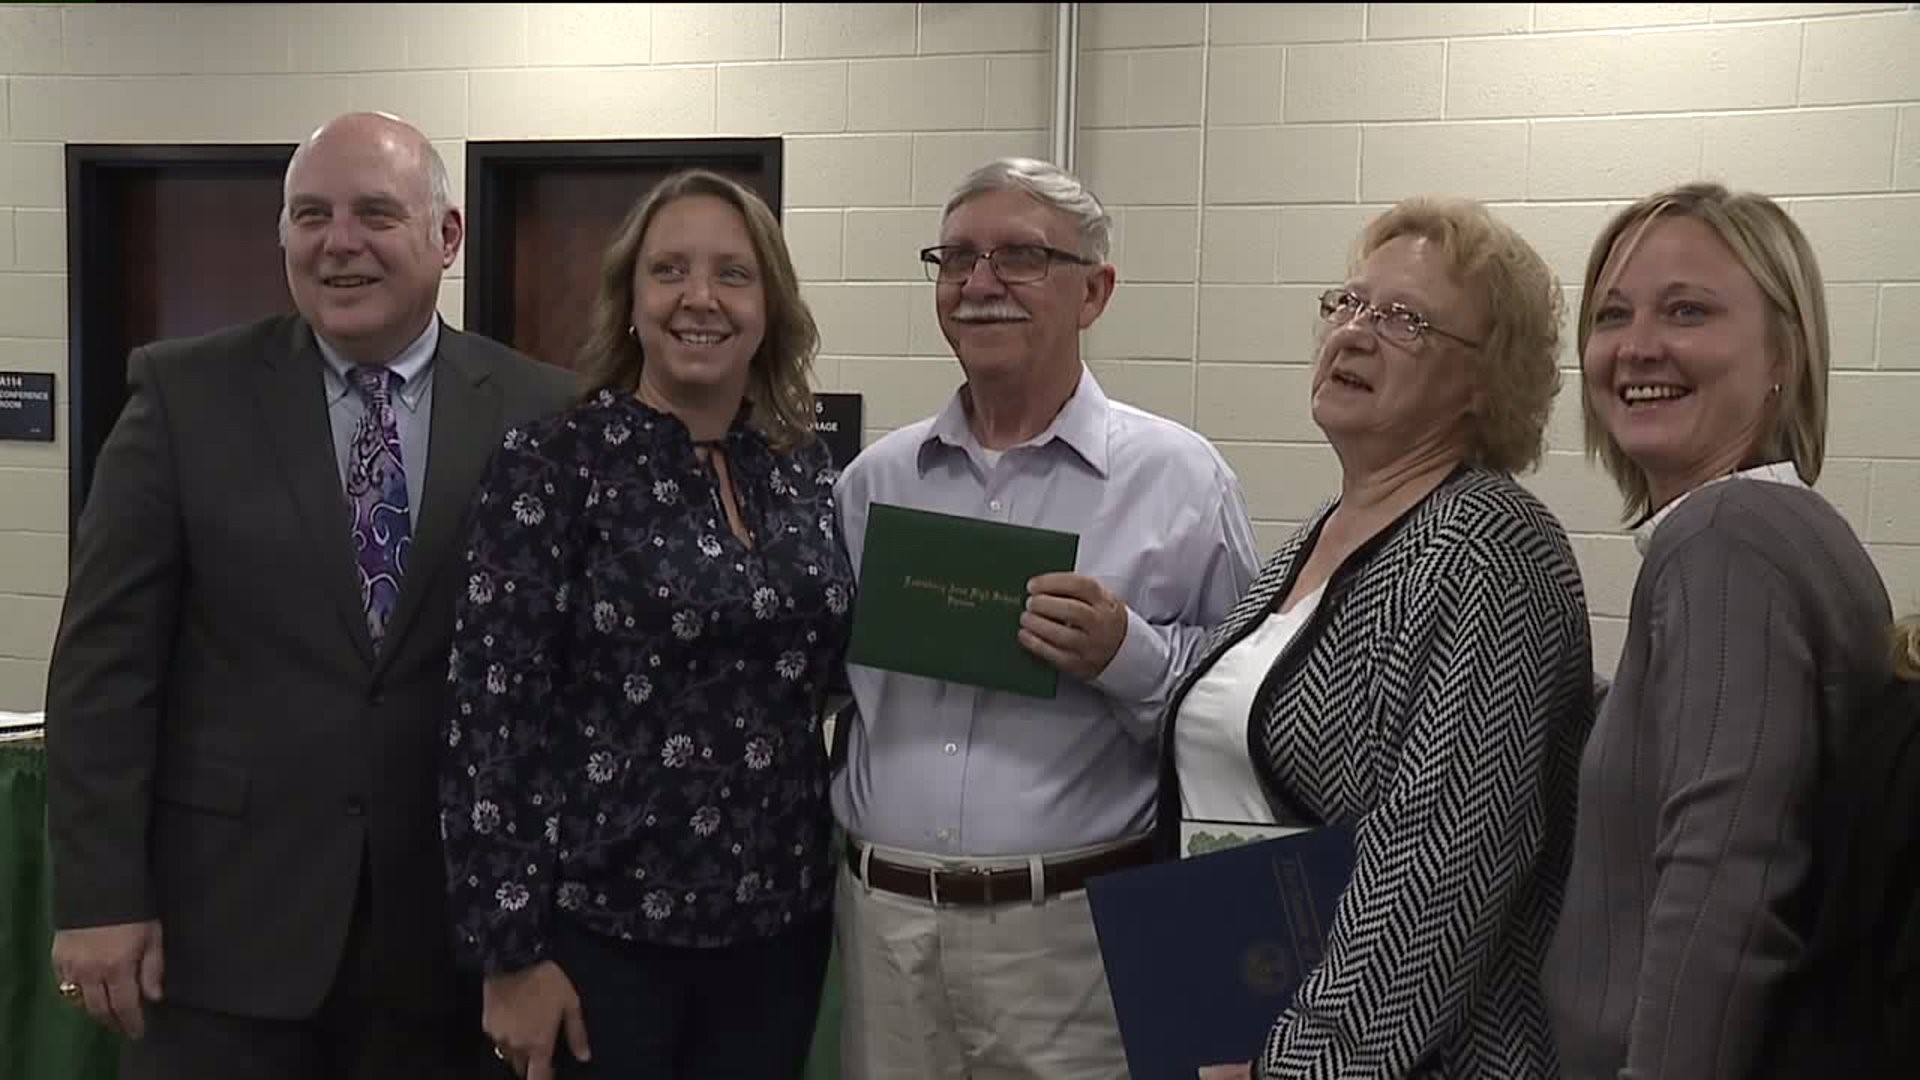 Union County Veteran Receives Diploma After Waiting 50 Years